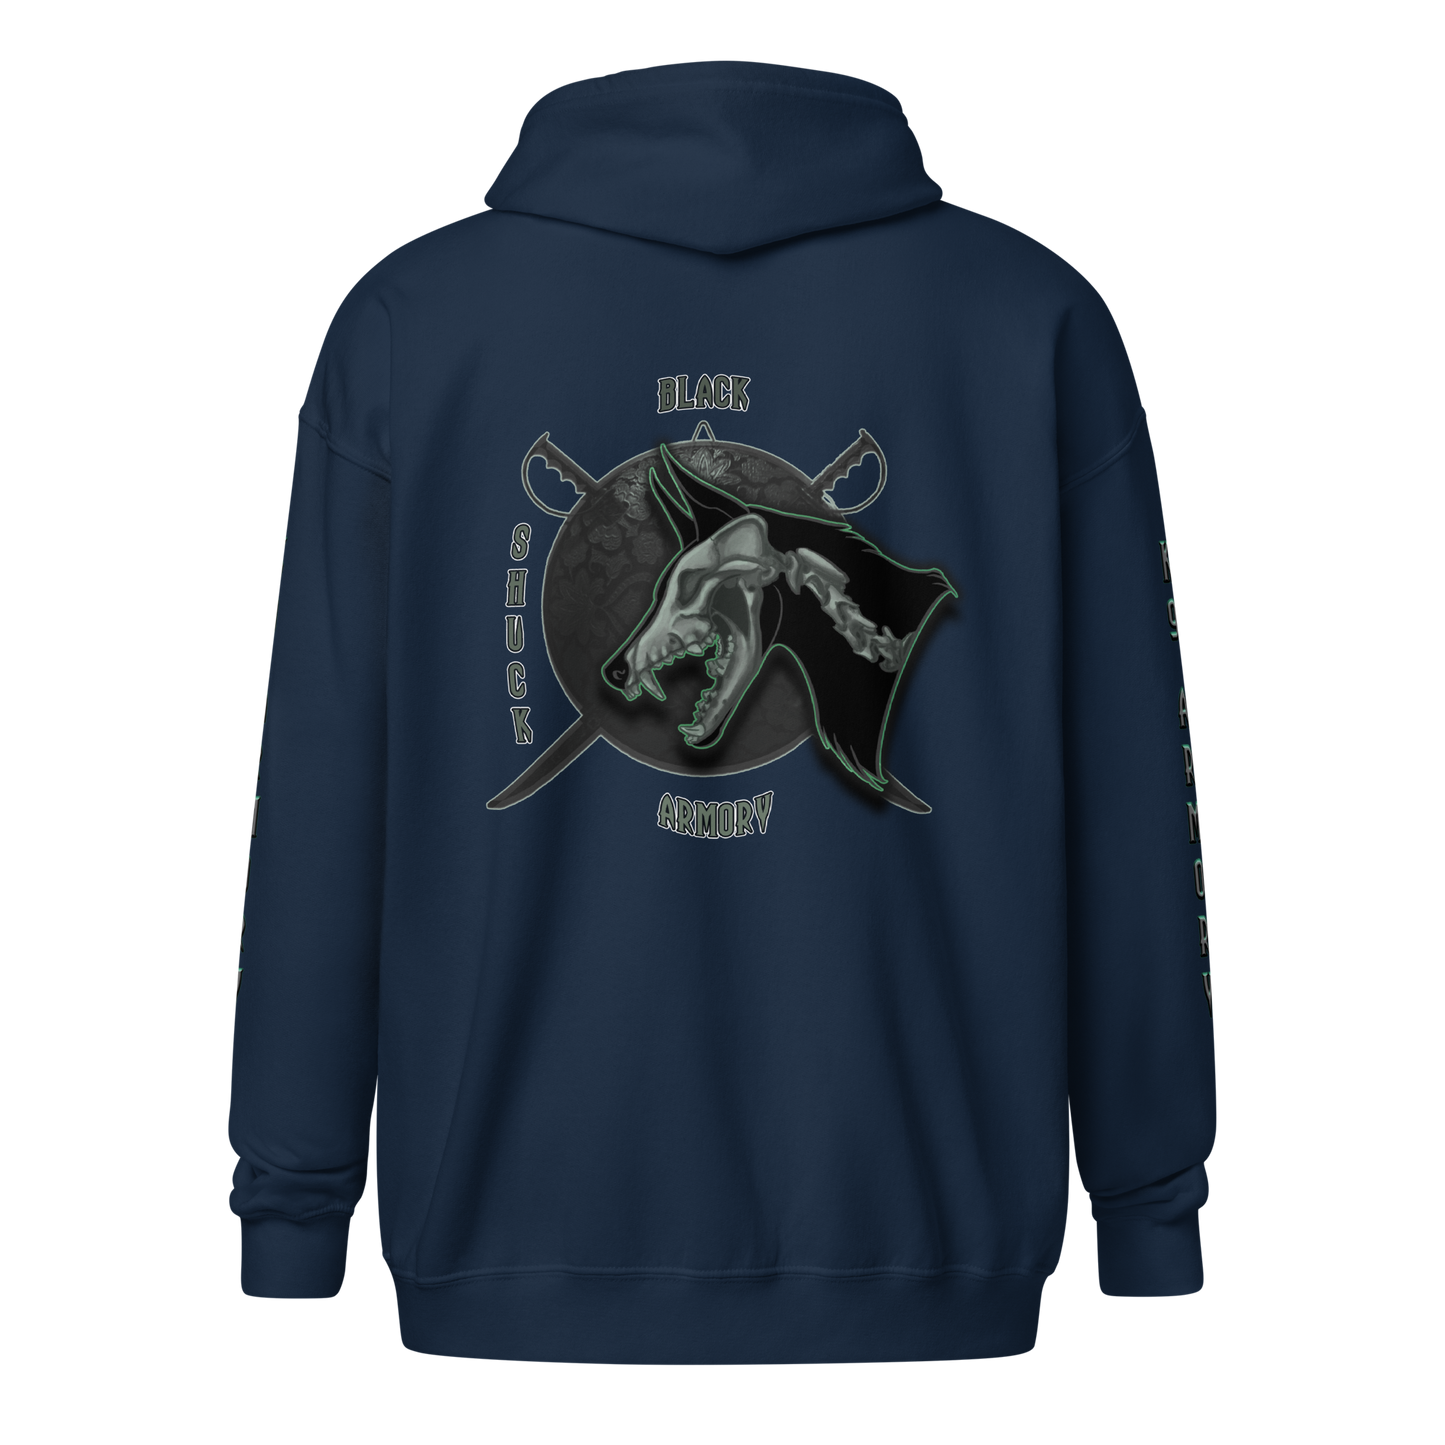 Official Black Shuck Armory Zip Up Hoodie